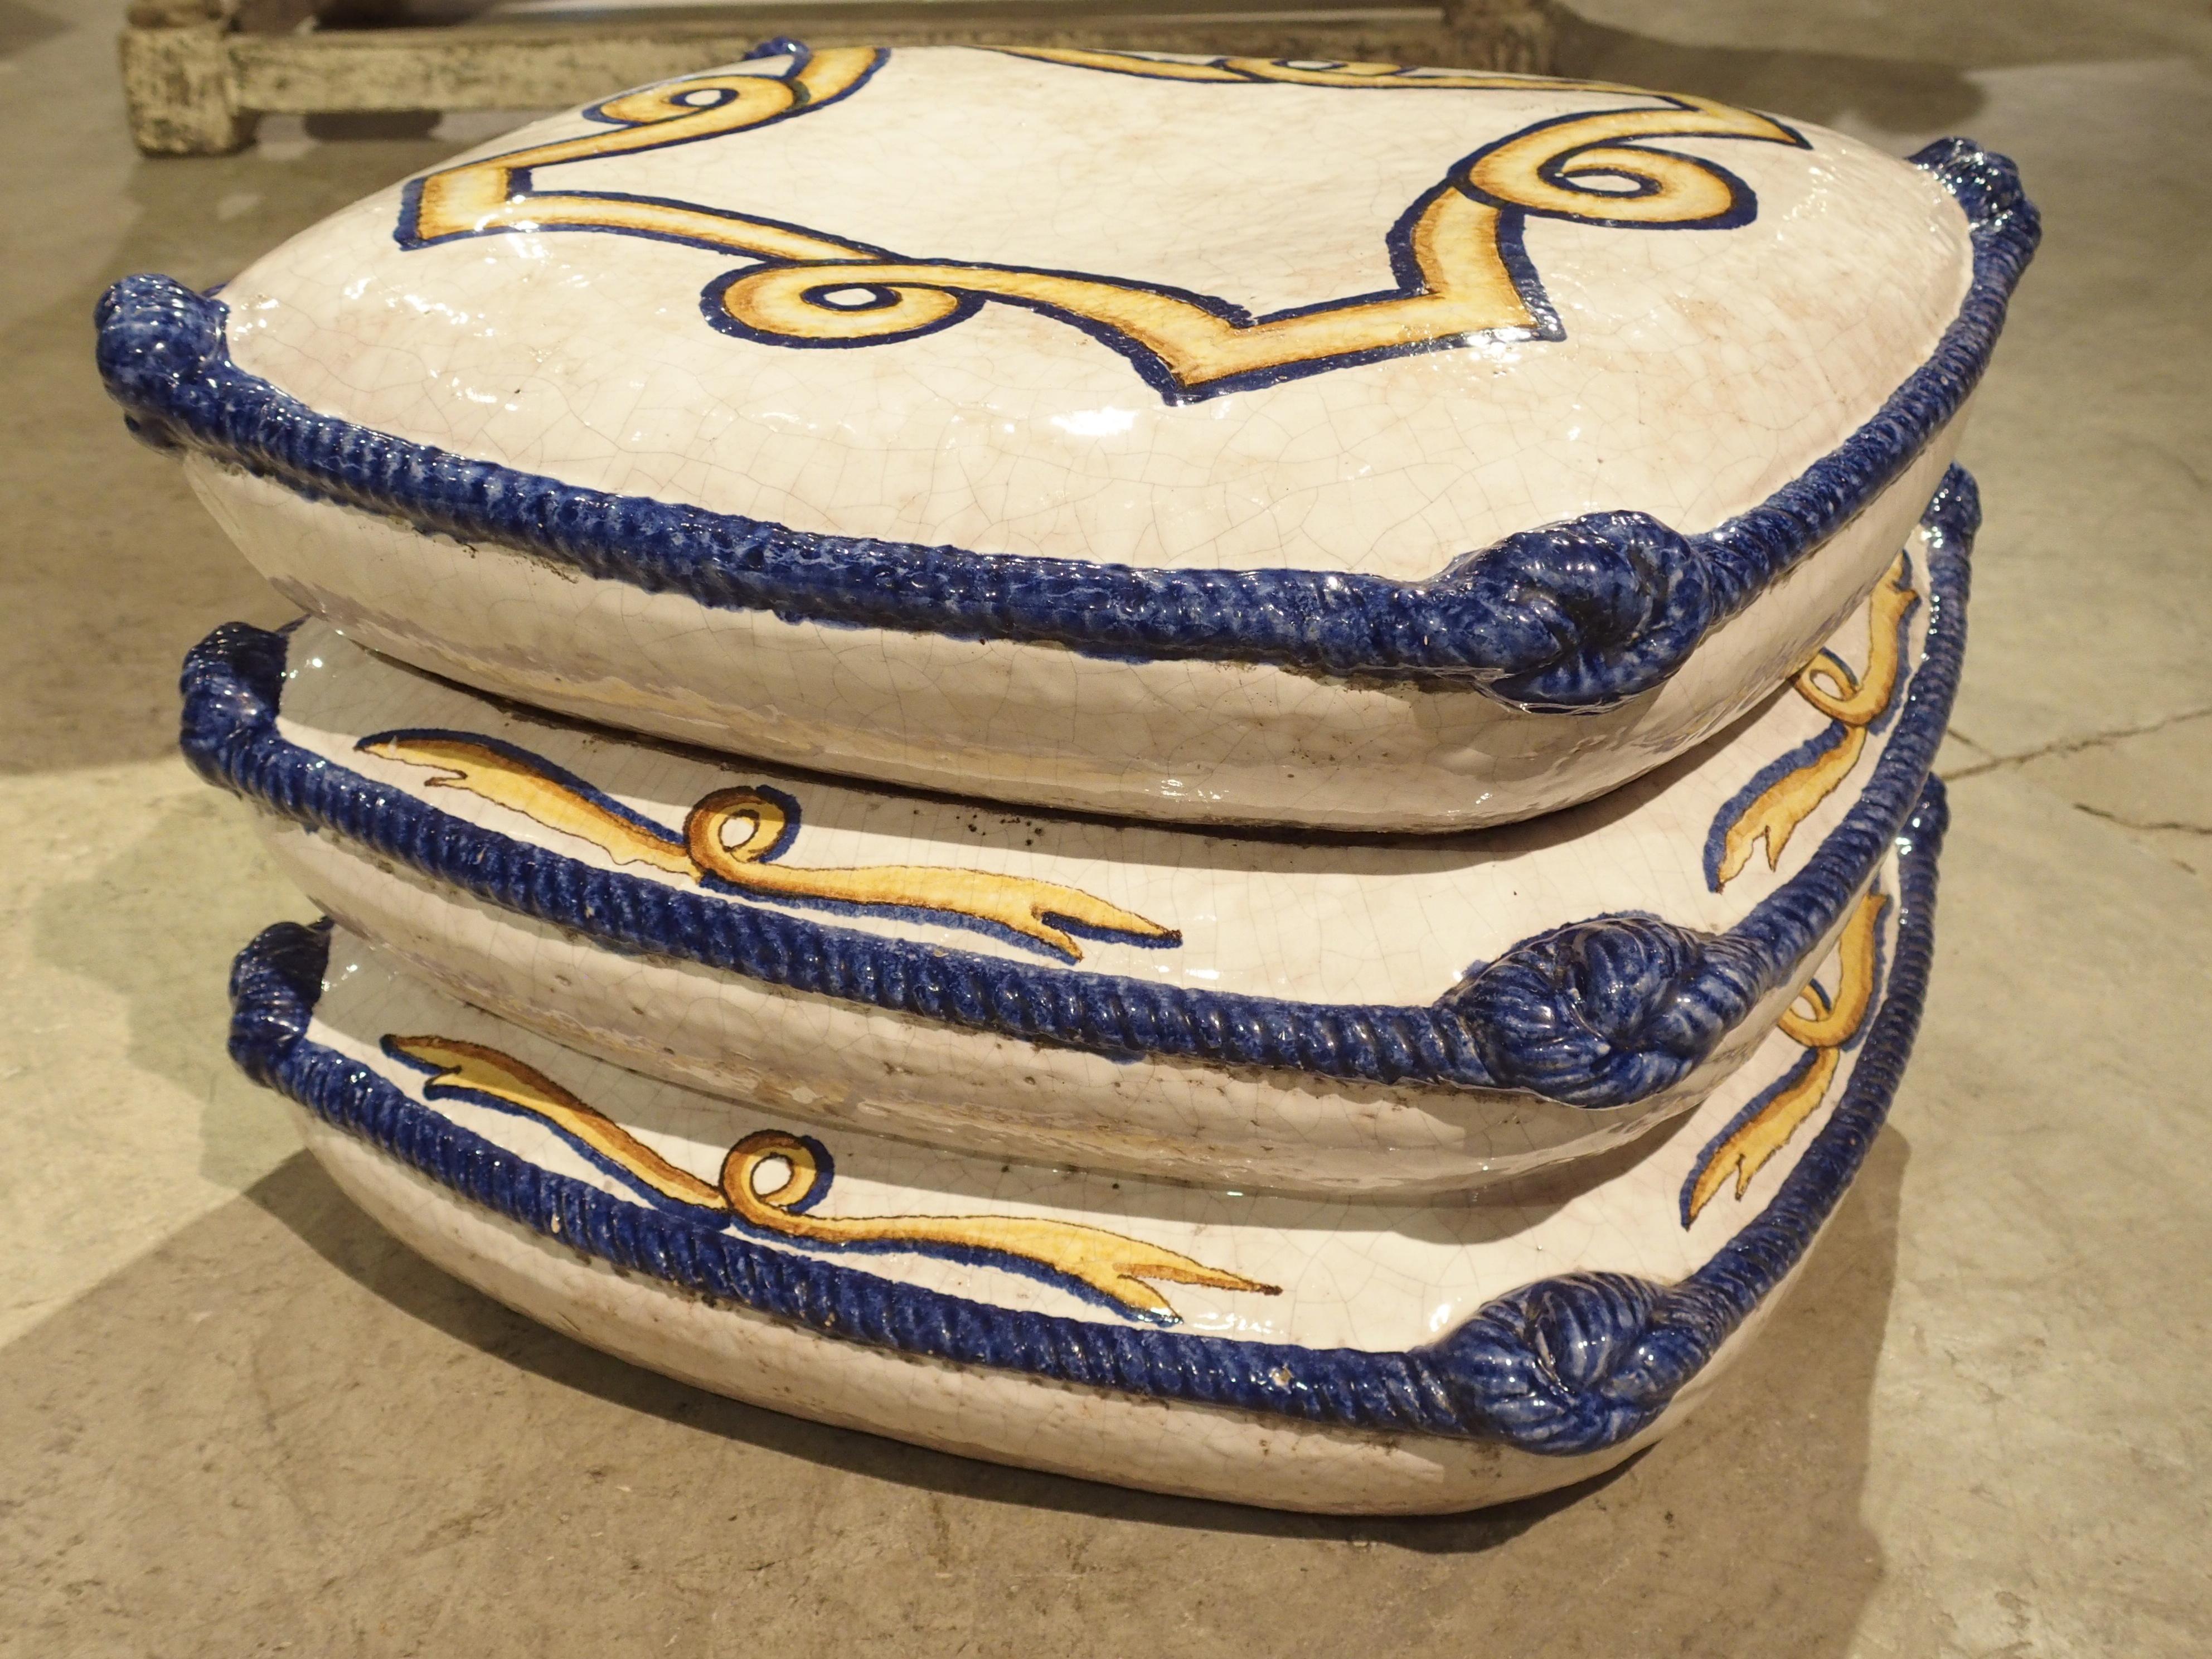 Mid-20th Century Decorative Glazed Terracotta Pillow Stack from Italy, 1940s